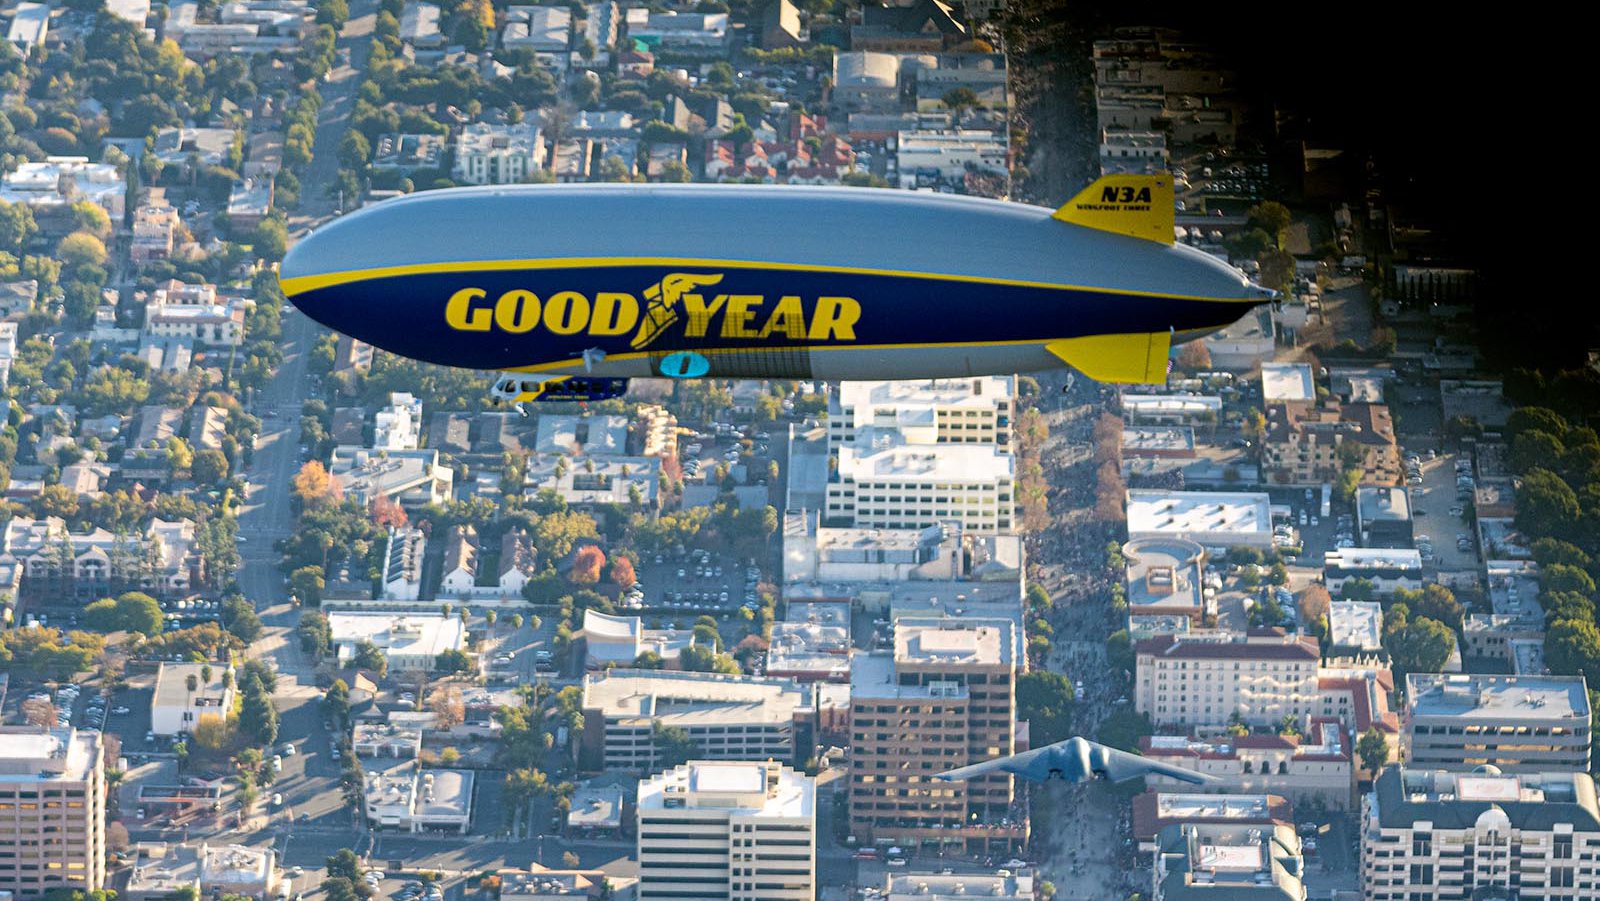 Blog photo of the B-2 Stealth Bomber flying under the Goodyear Blimp in Pasadena, California